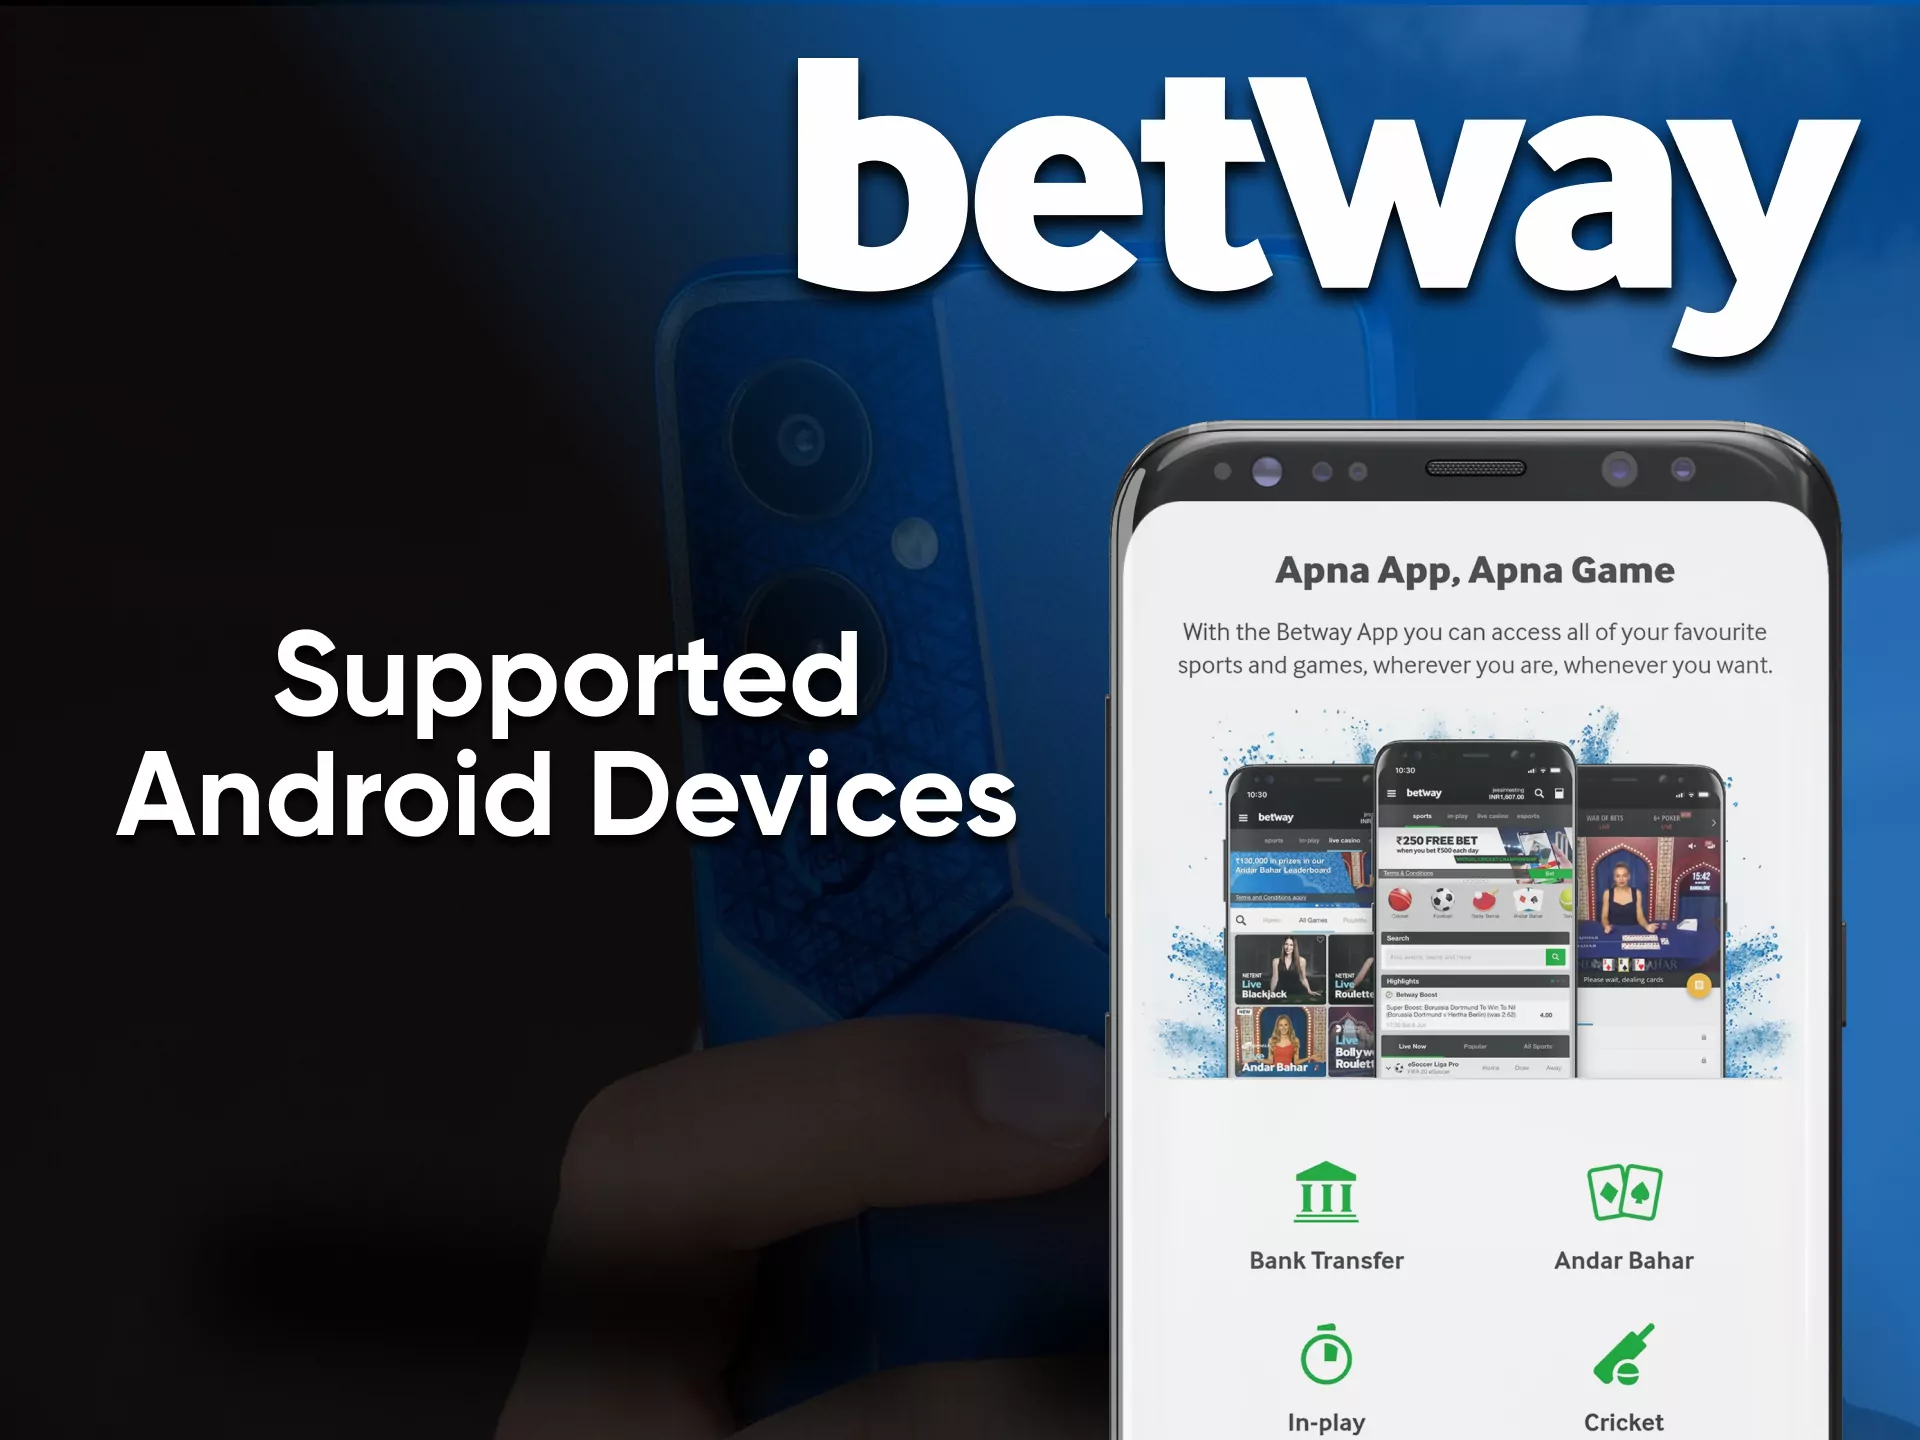 Use a smartphone for the Betway casino game.